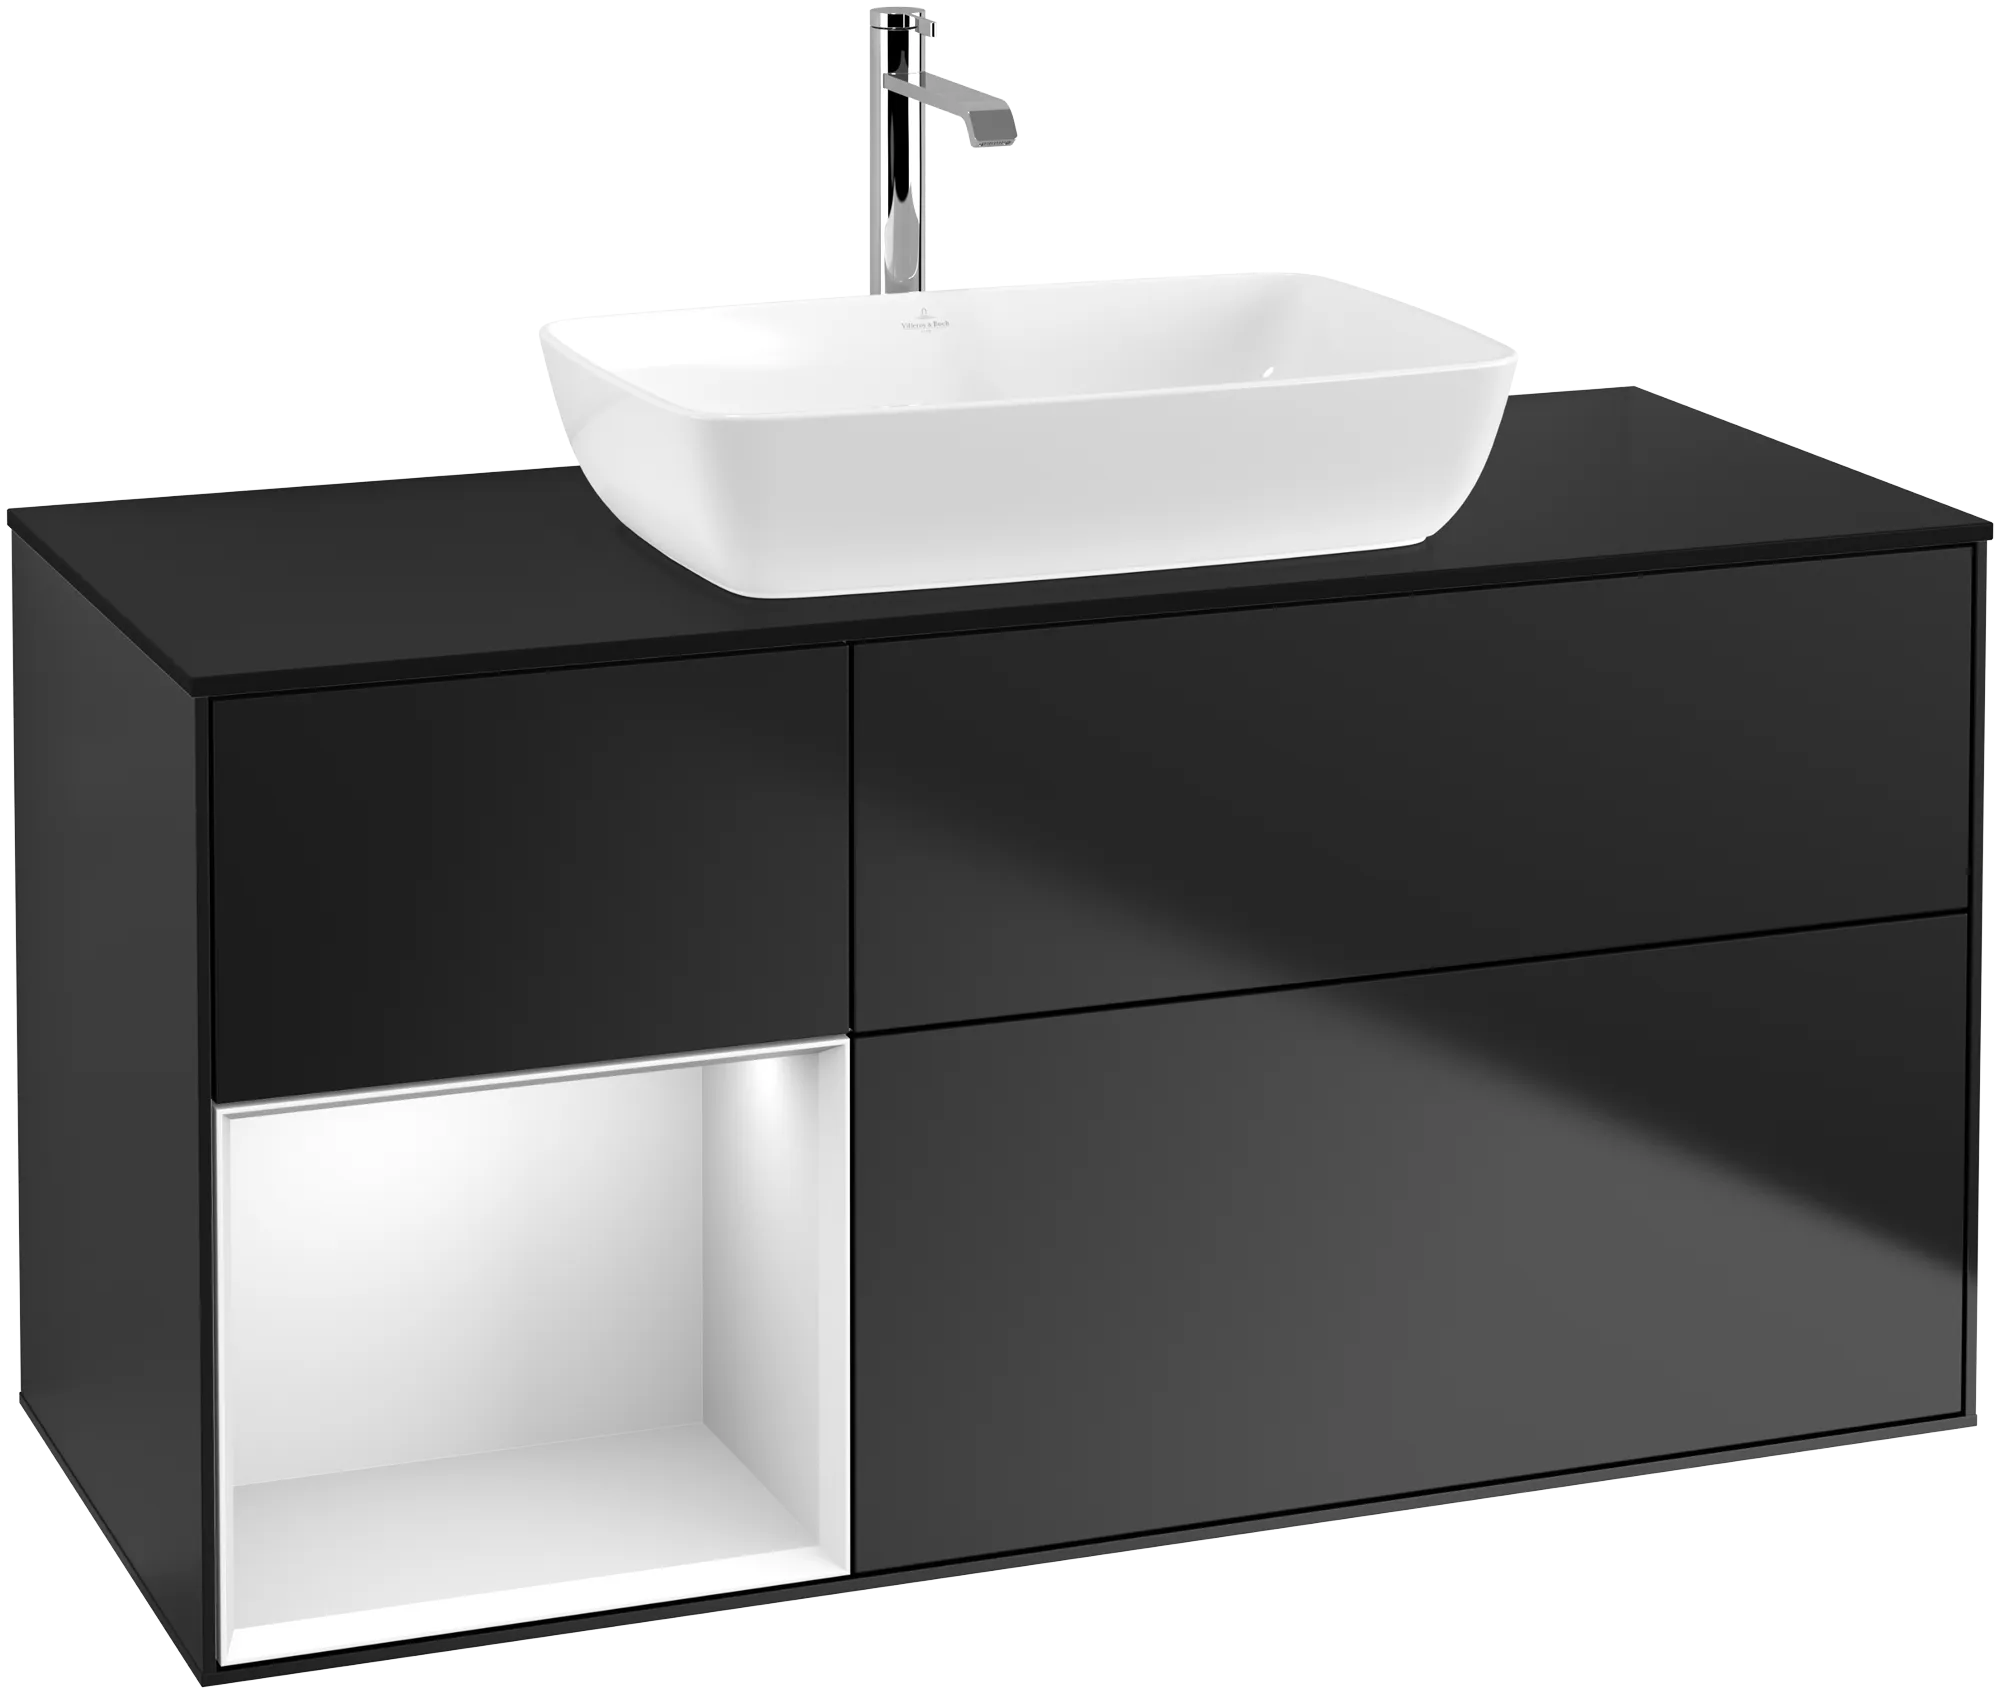 Obrázek VILLEROY BOCH Finion Vanity unit, with lighting, 3 pull-out compartments, 1200 x 603 x 501 mm, Black Matt Lacquer / White Matt Lacquer / Glass Black Matt #G822MTPD